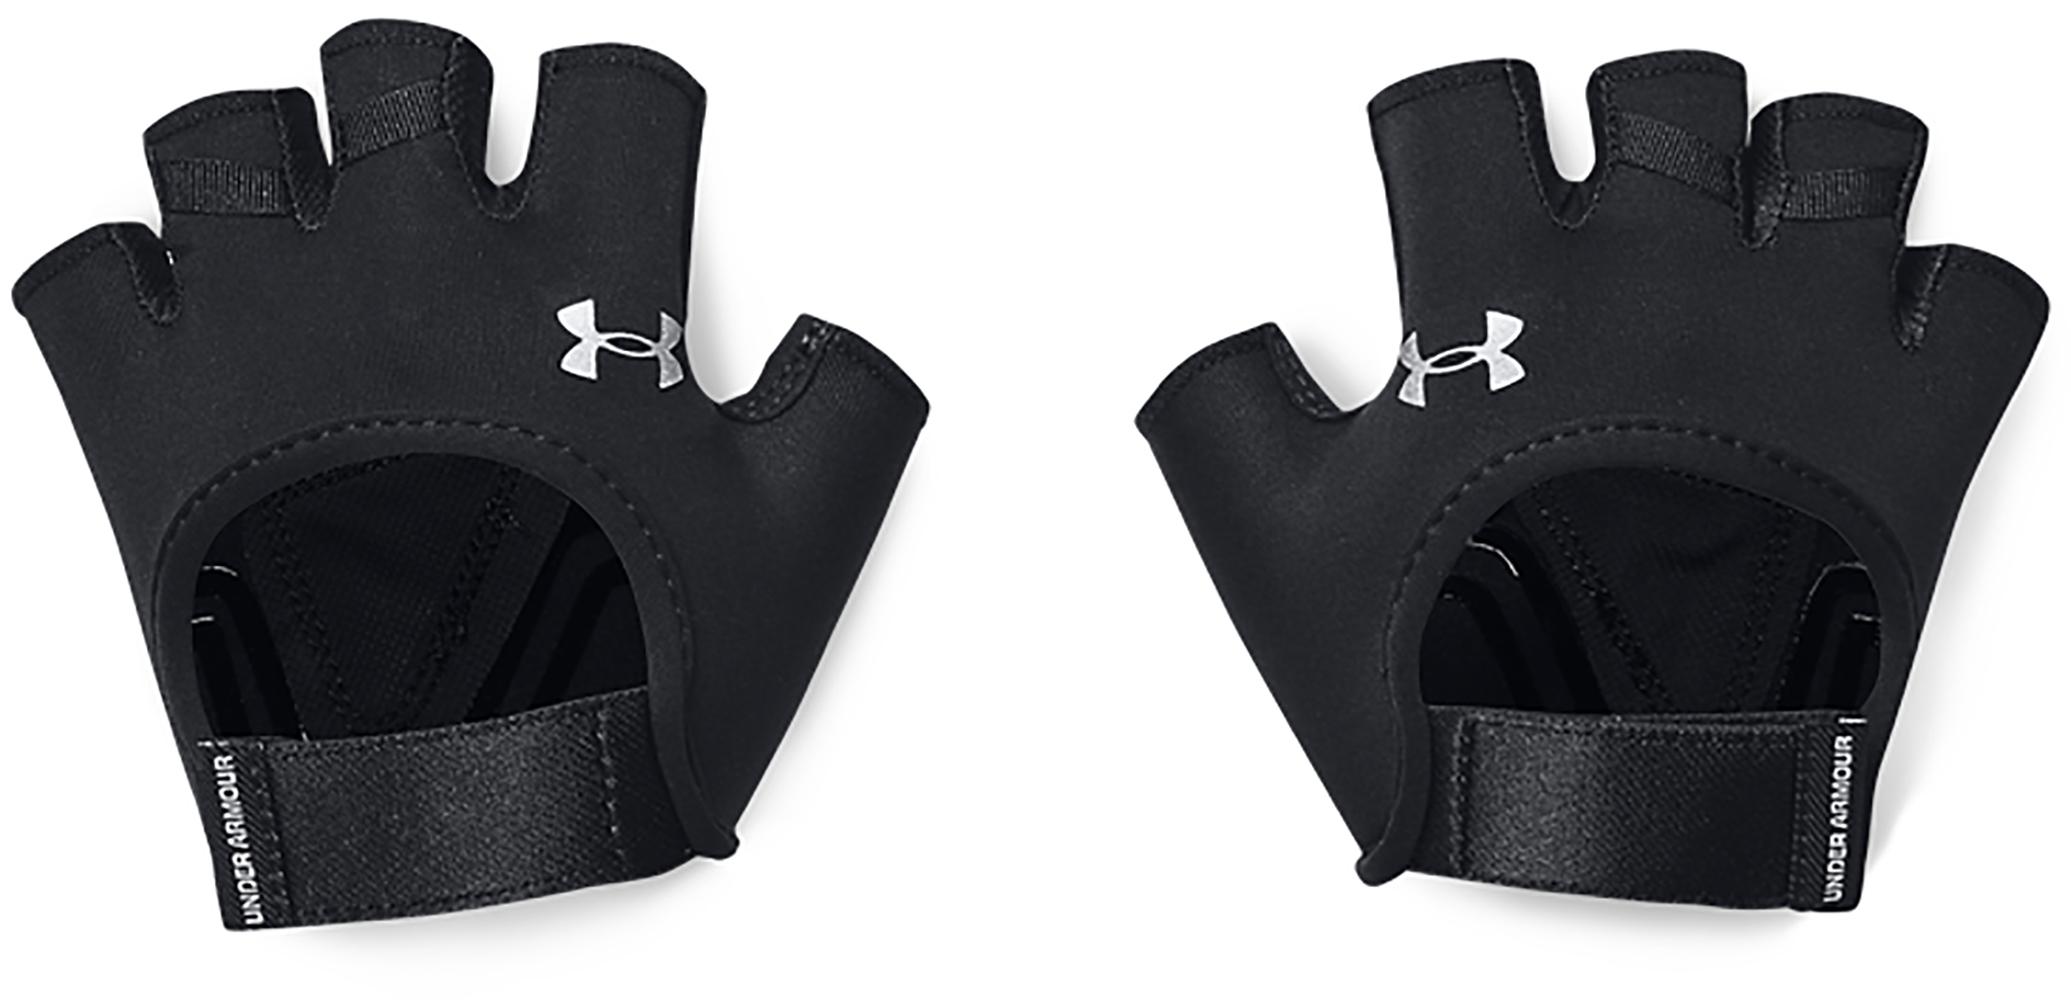 Under Armour Womens Training Gloves - Black / / Silver